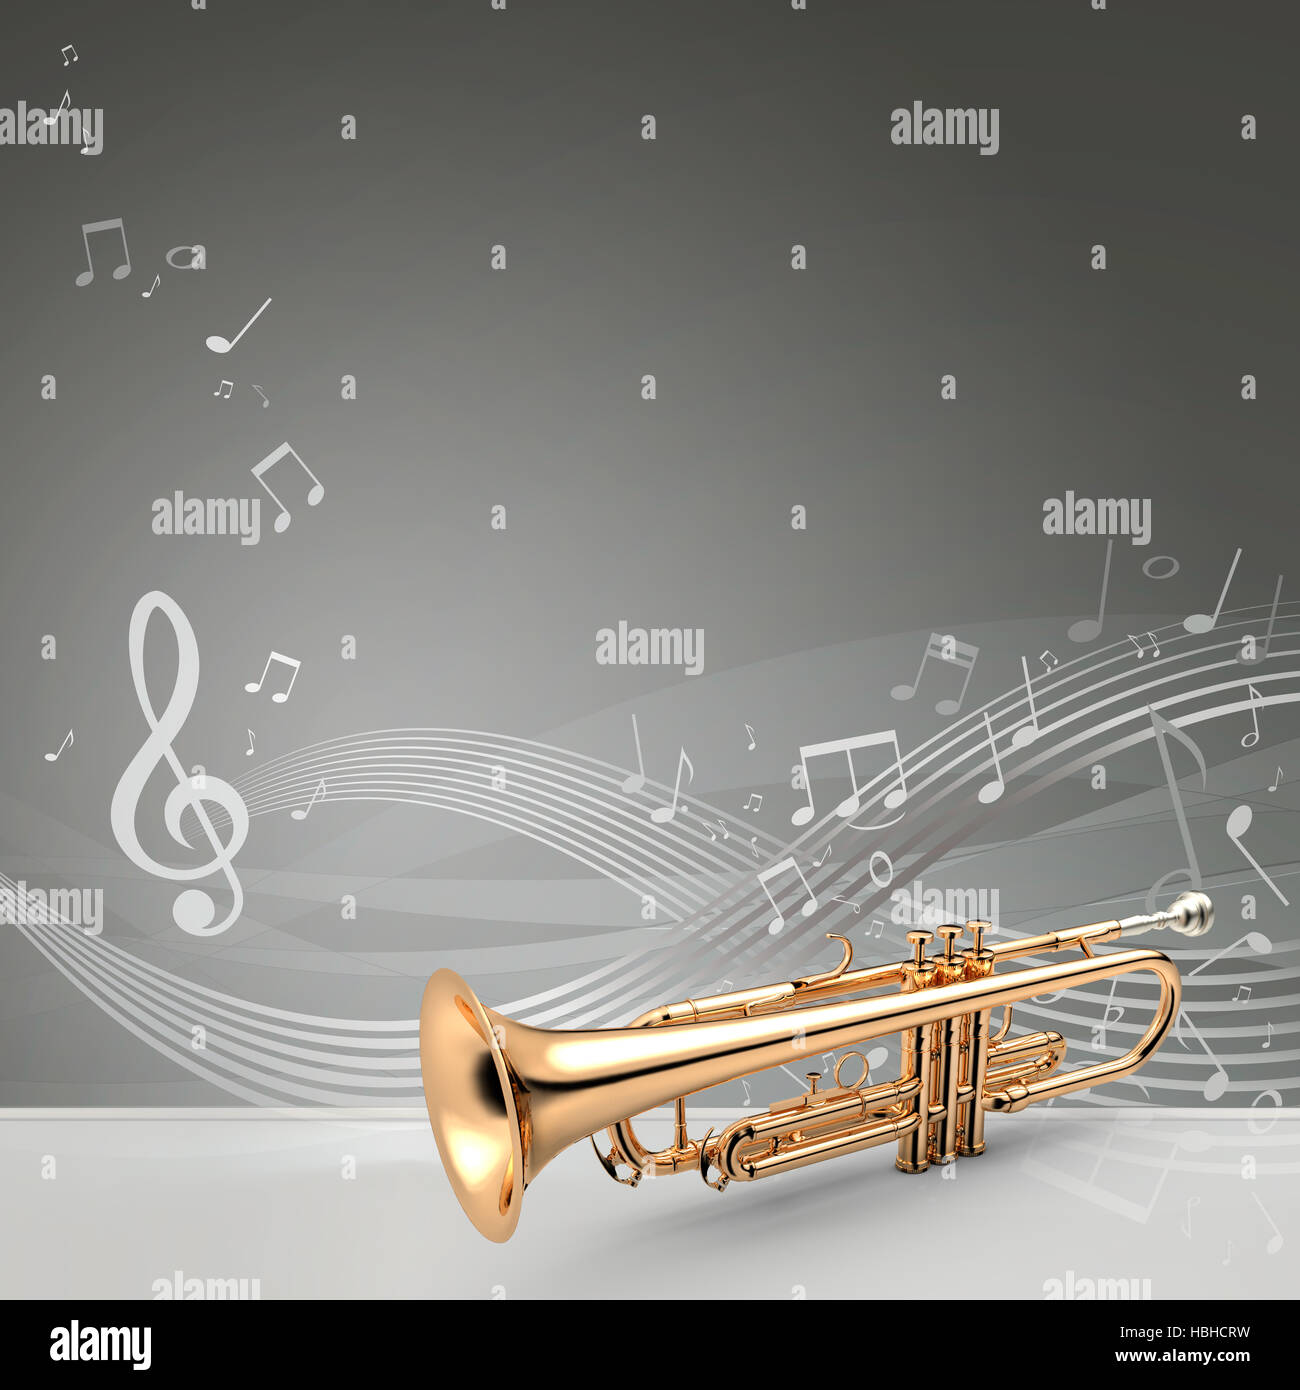 Realistic Detailed 3d Trumpets Football Fan. Vector Stock Vector -  Illustration of closeup, announcement: 118271698